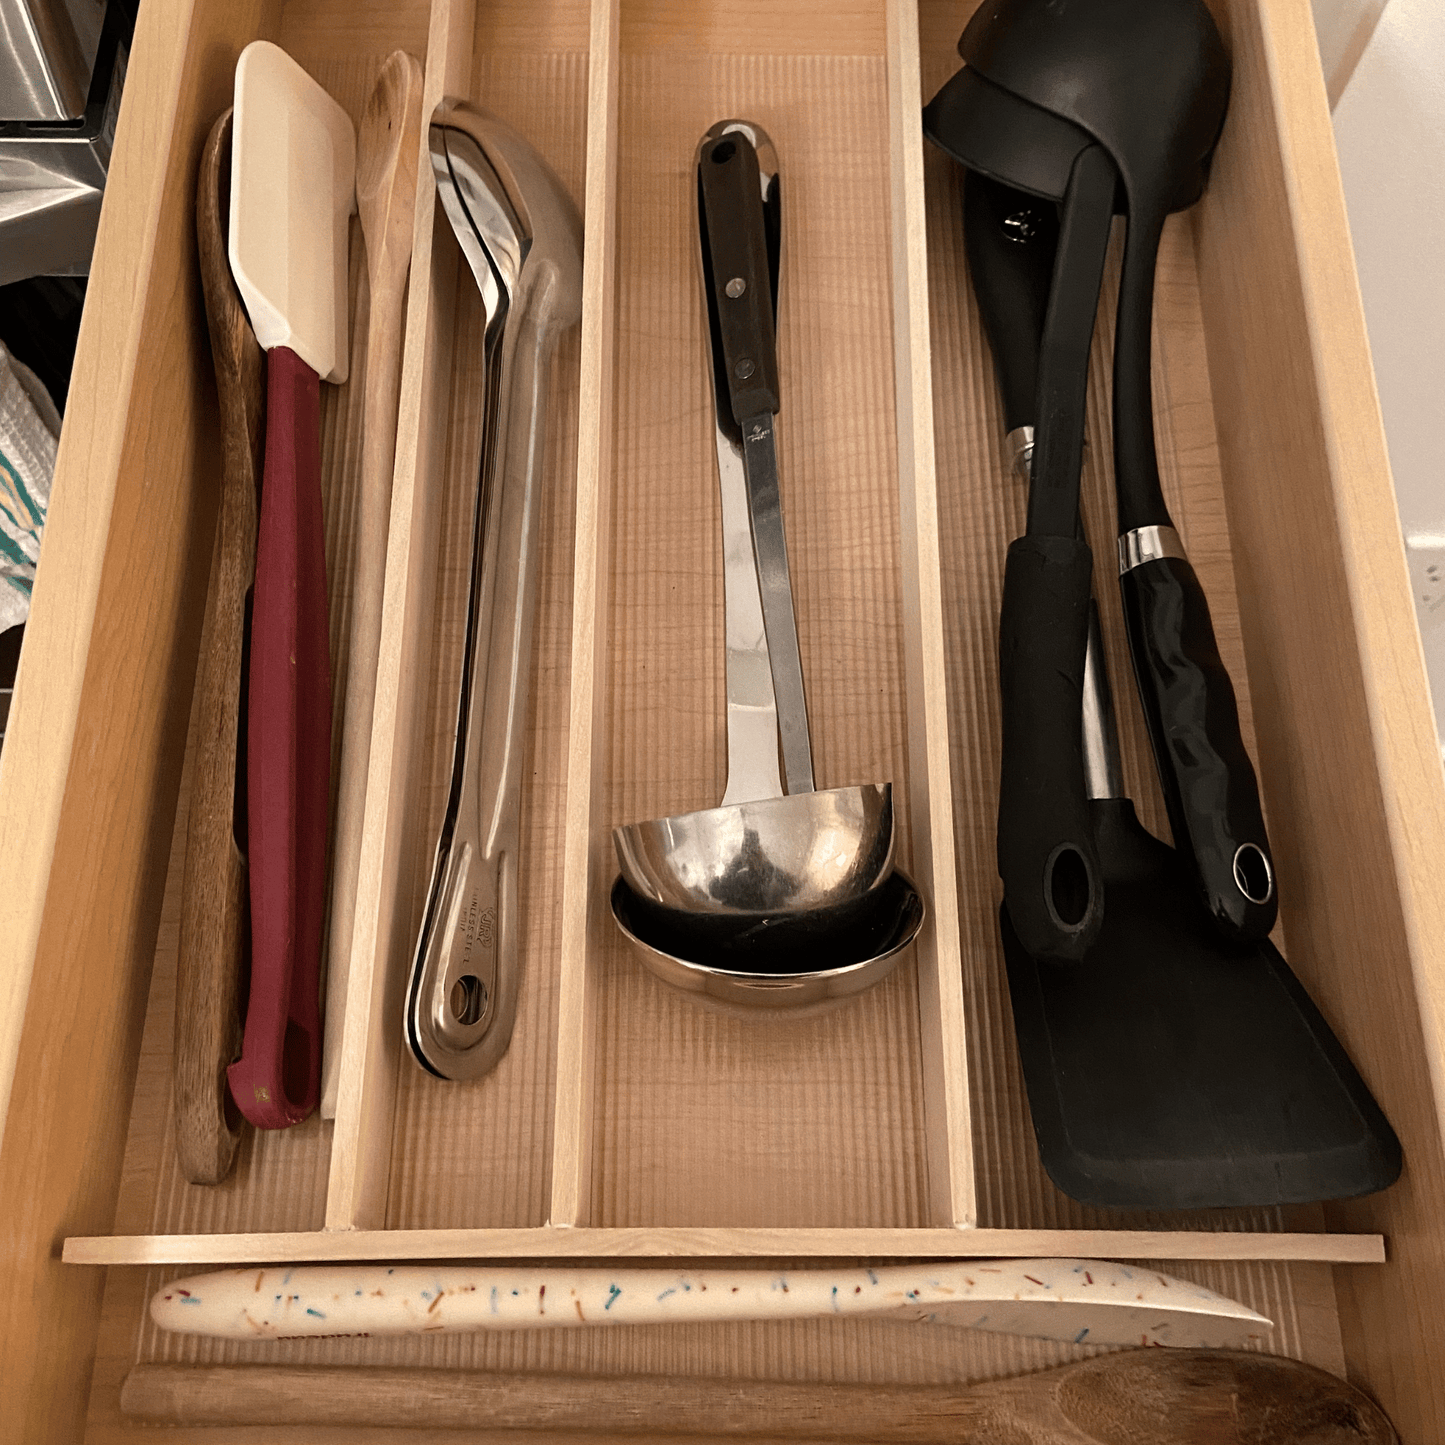 Wood dividers in a drawer with kitchen utensils.